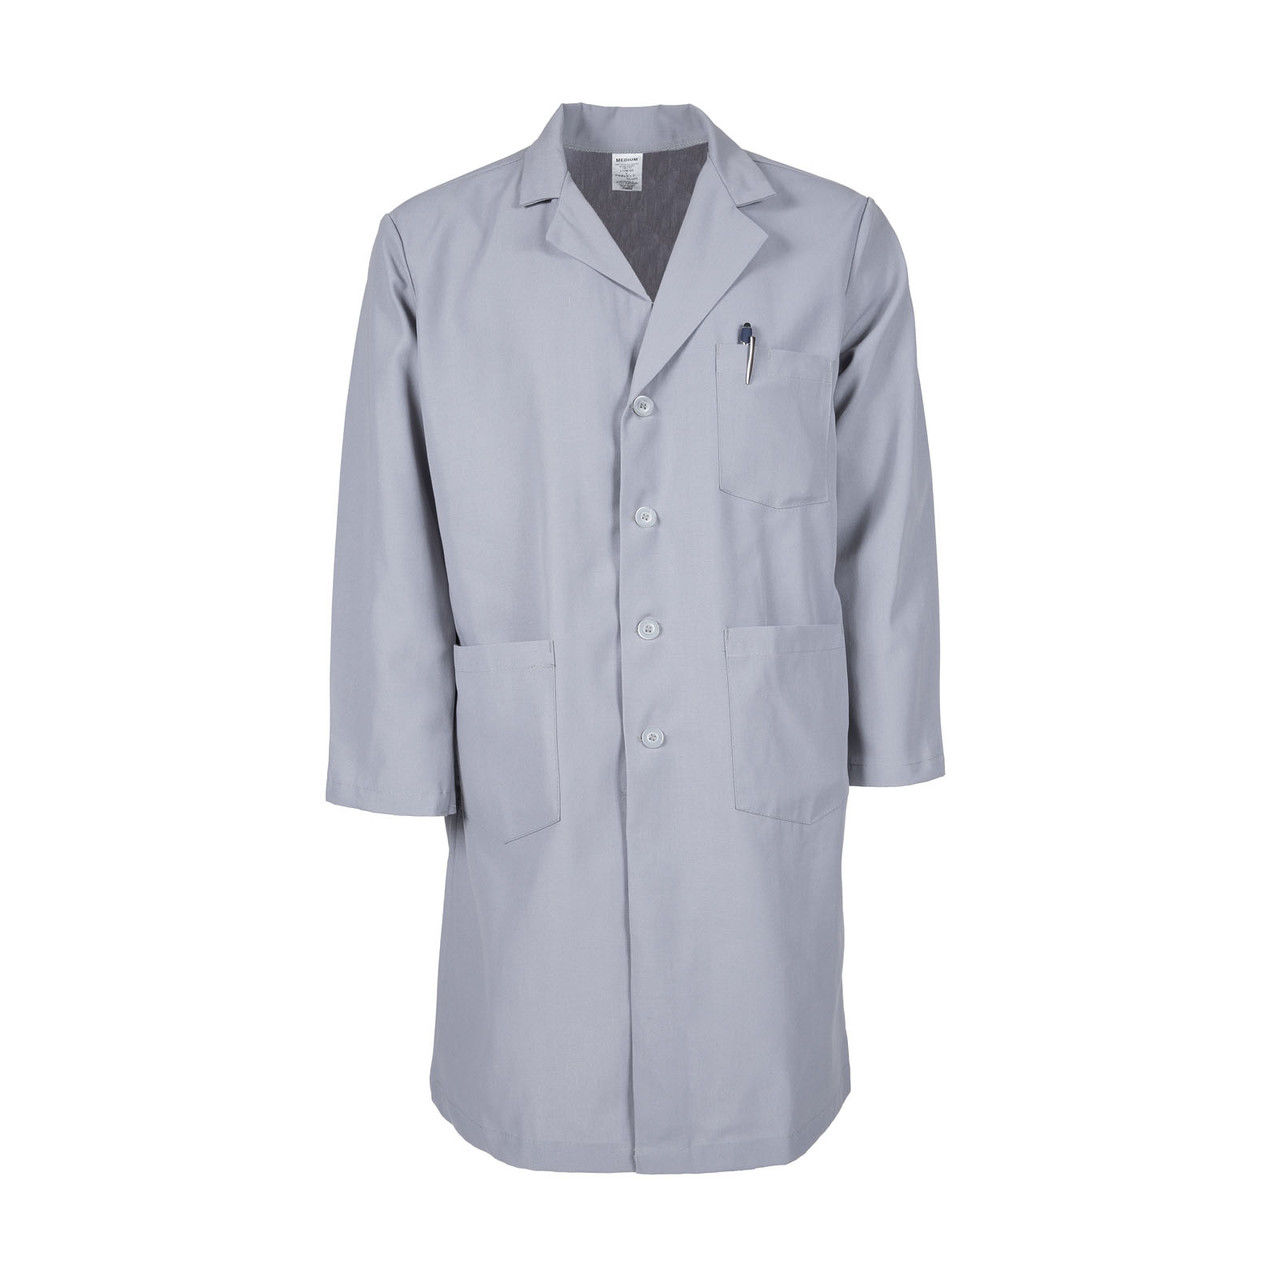 How long is the L17M grey lab coat designed for men measured in length?